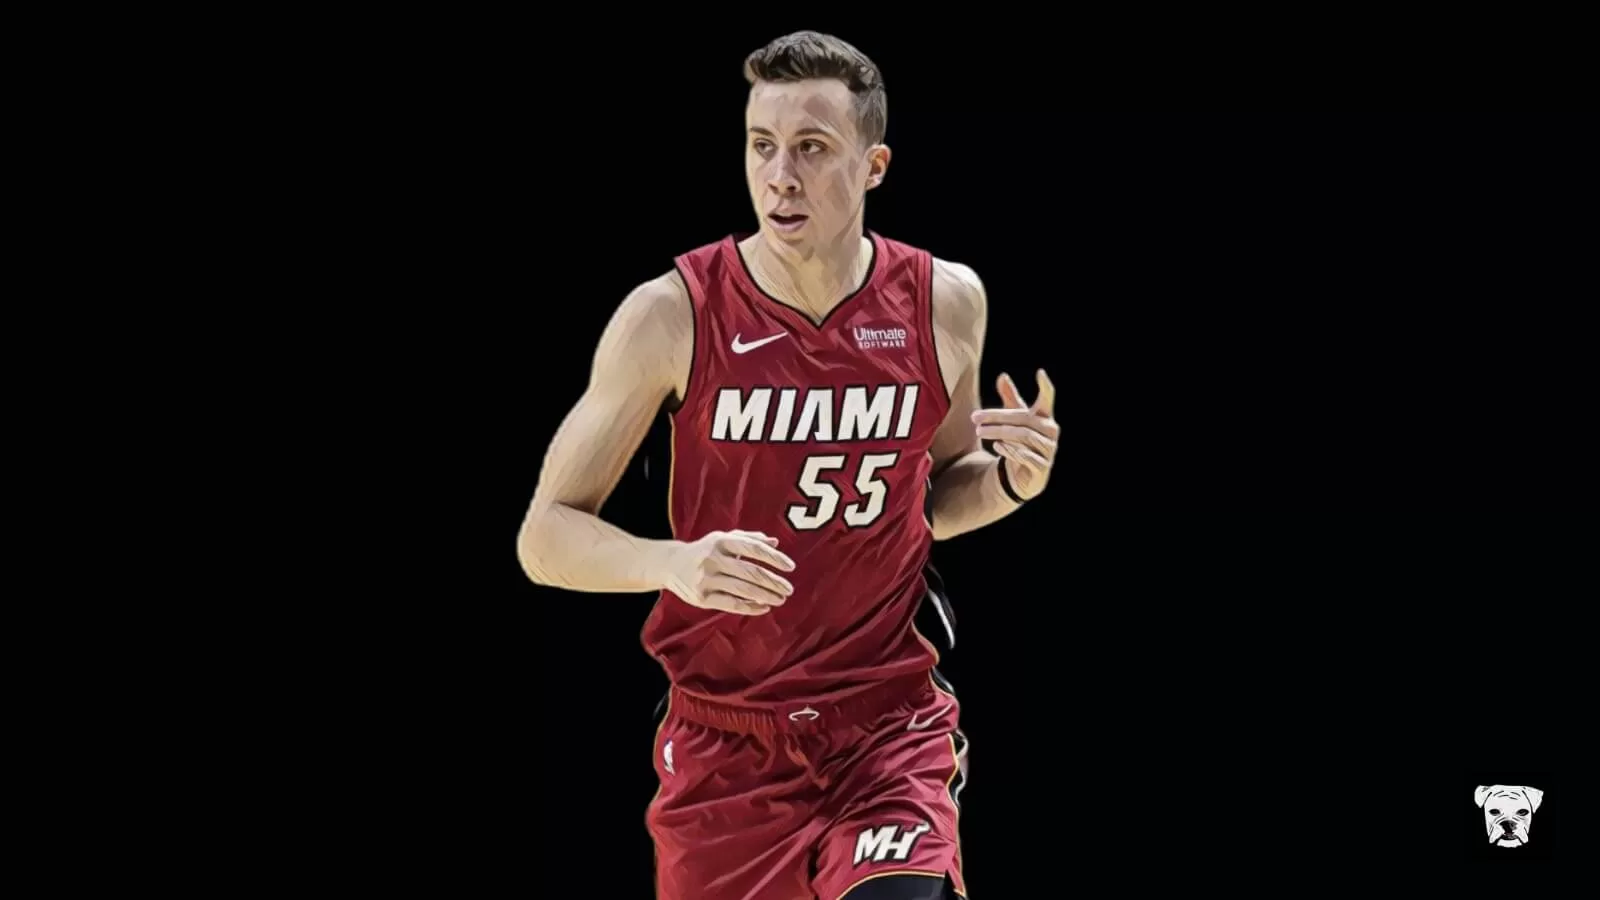 The story behind Duncan Robinson's incredible rise from D3 basketball to NBA sharpshooter